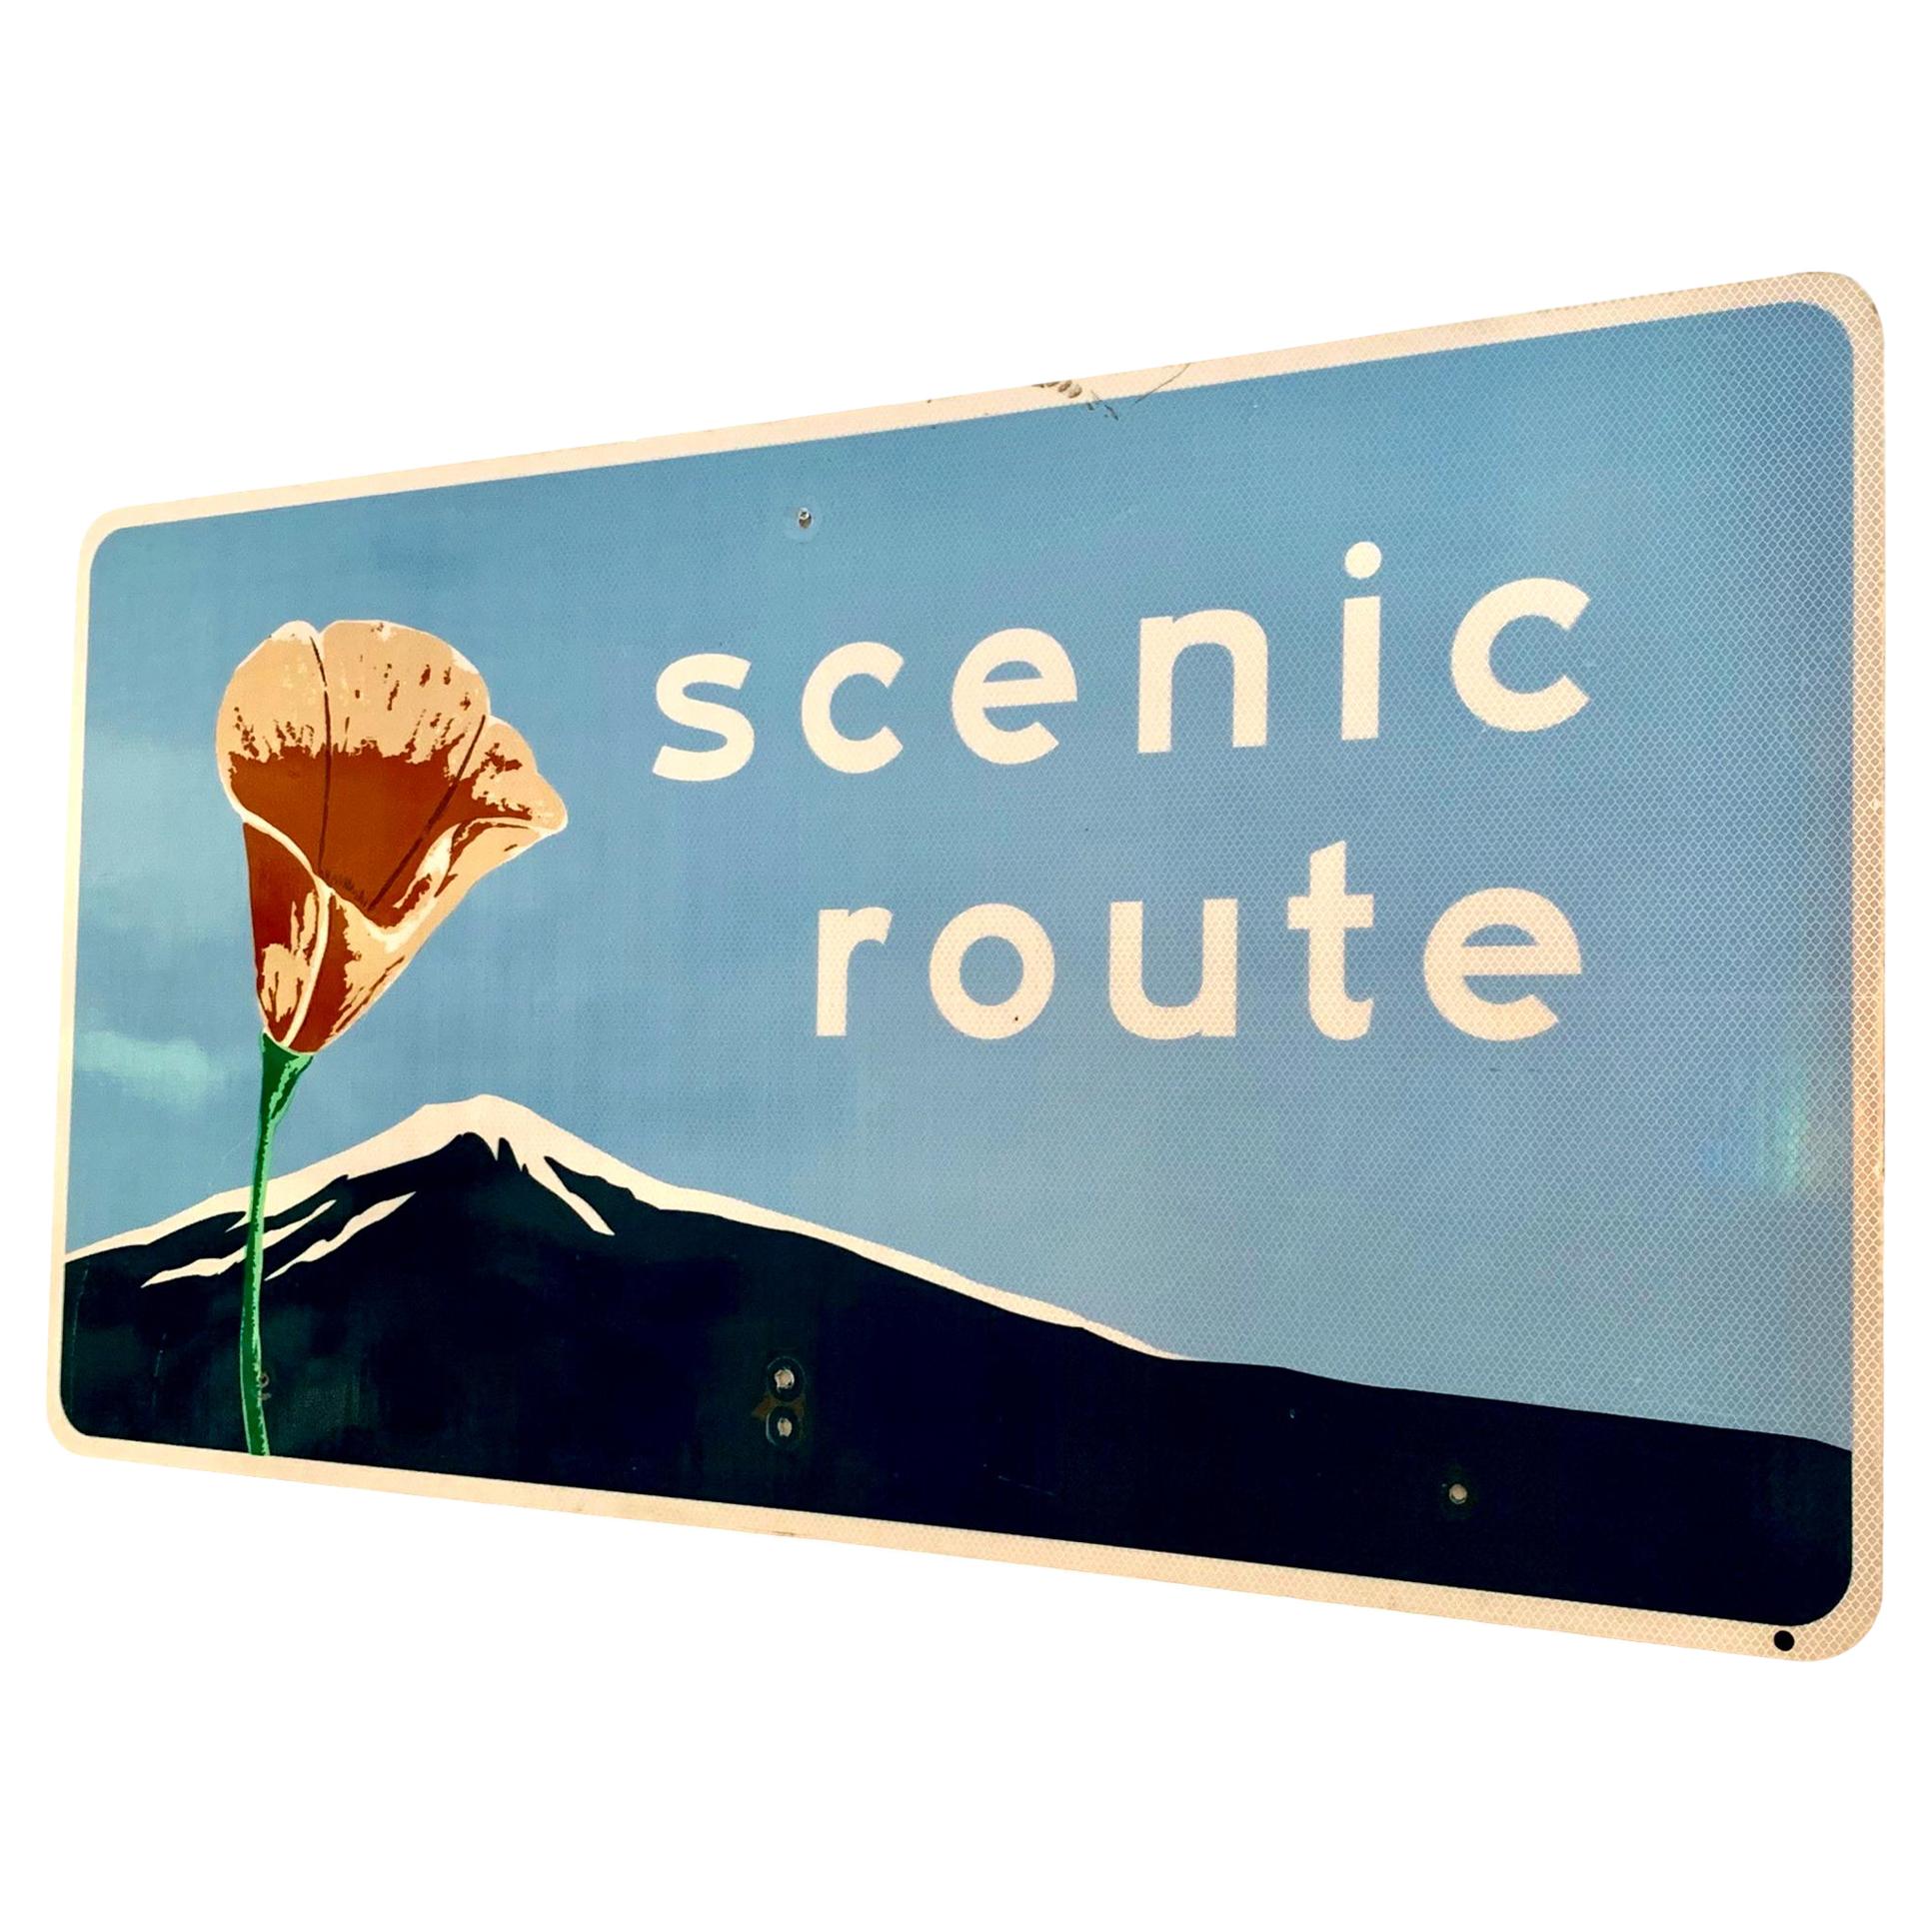 Large 'Scenic Route' California Highway Sign